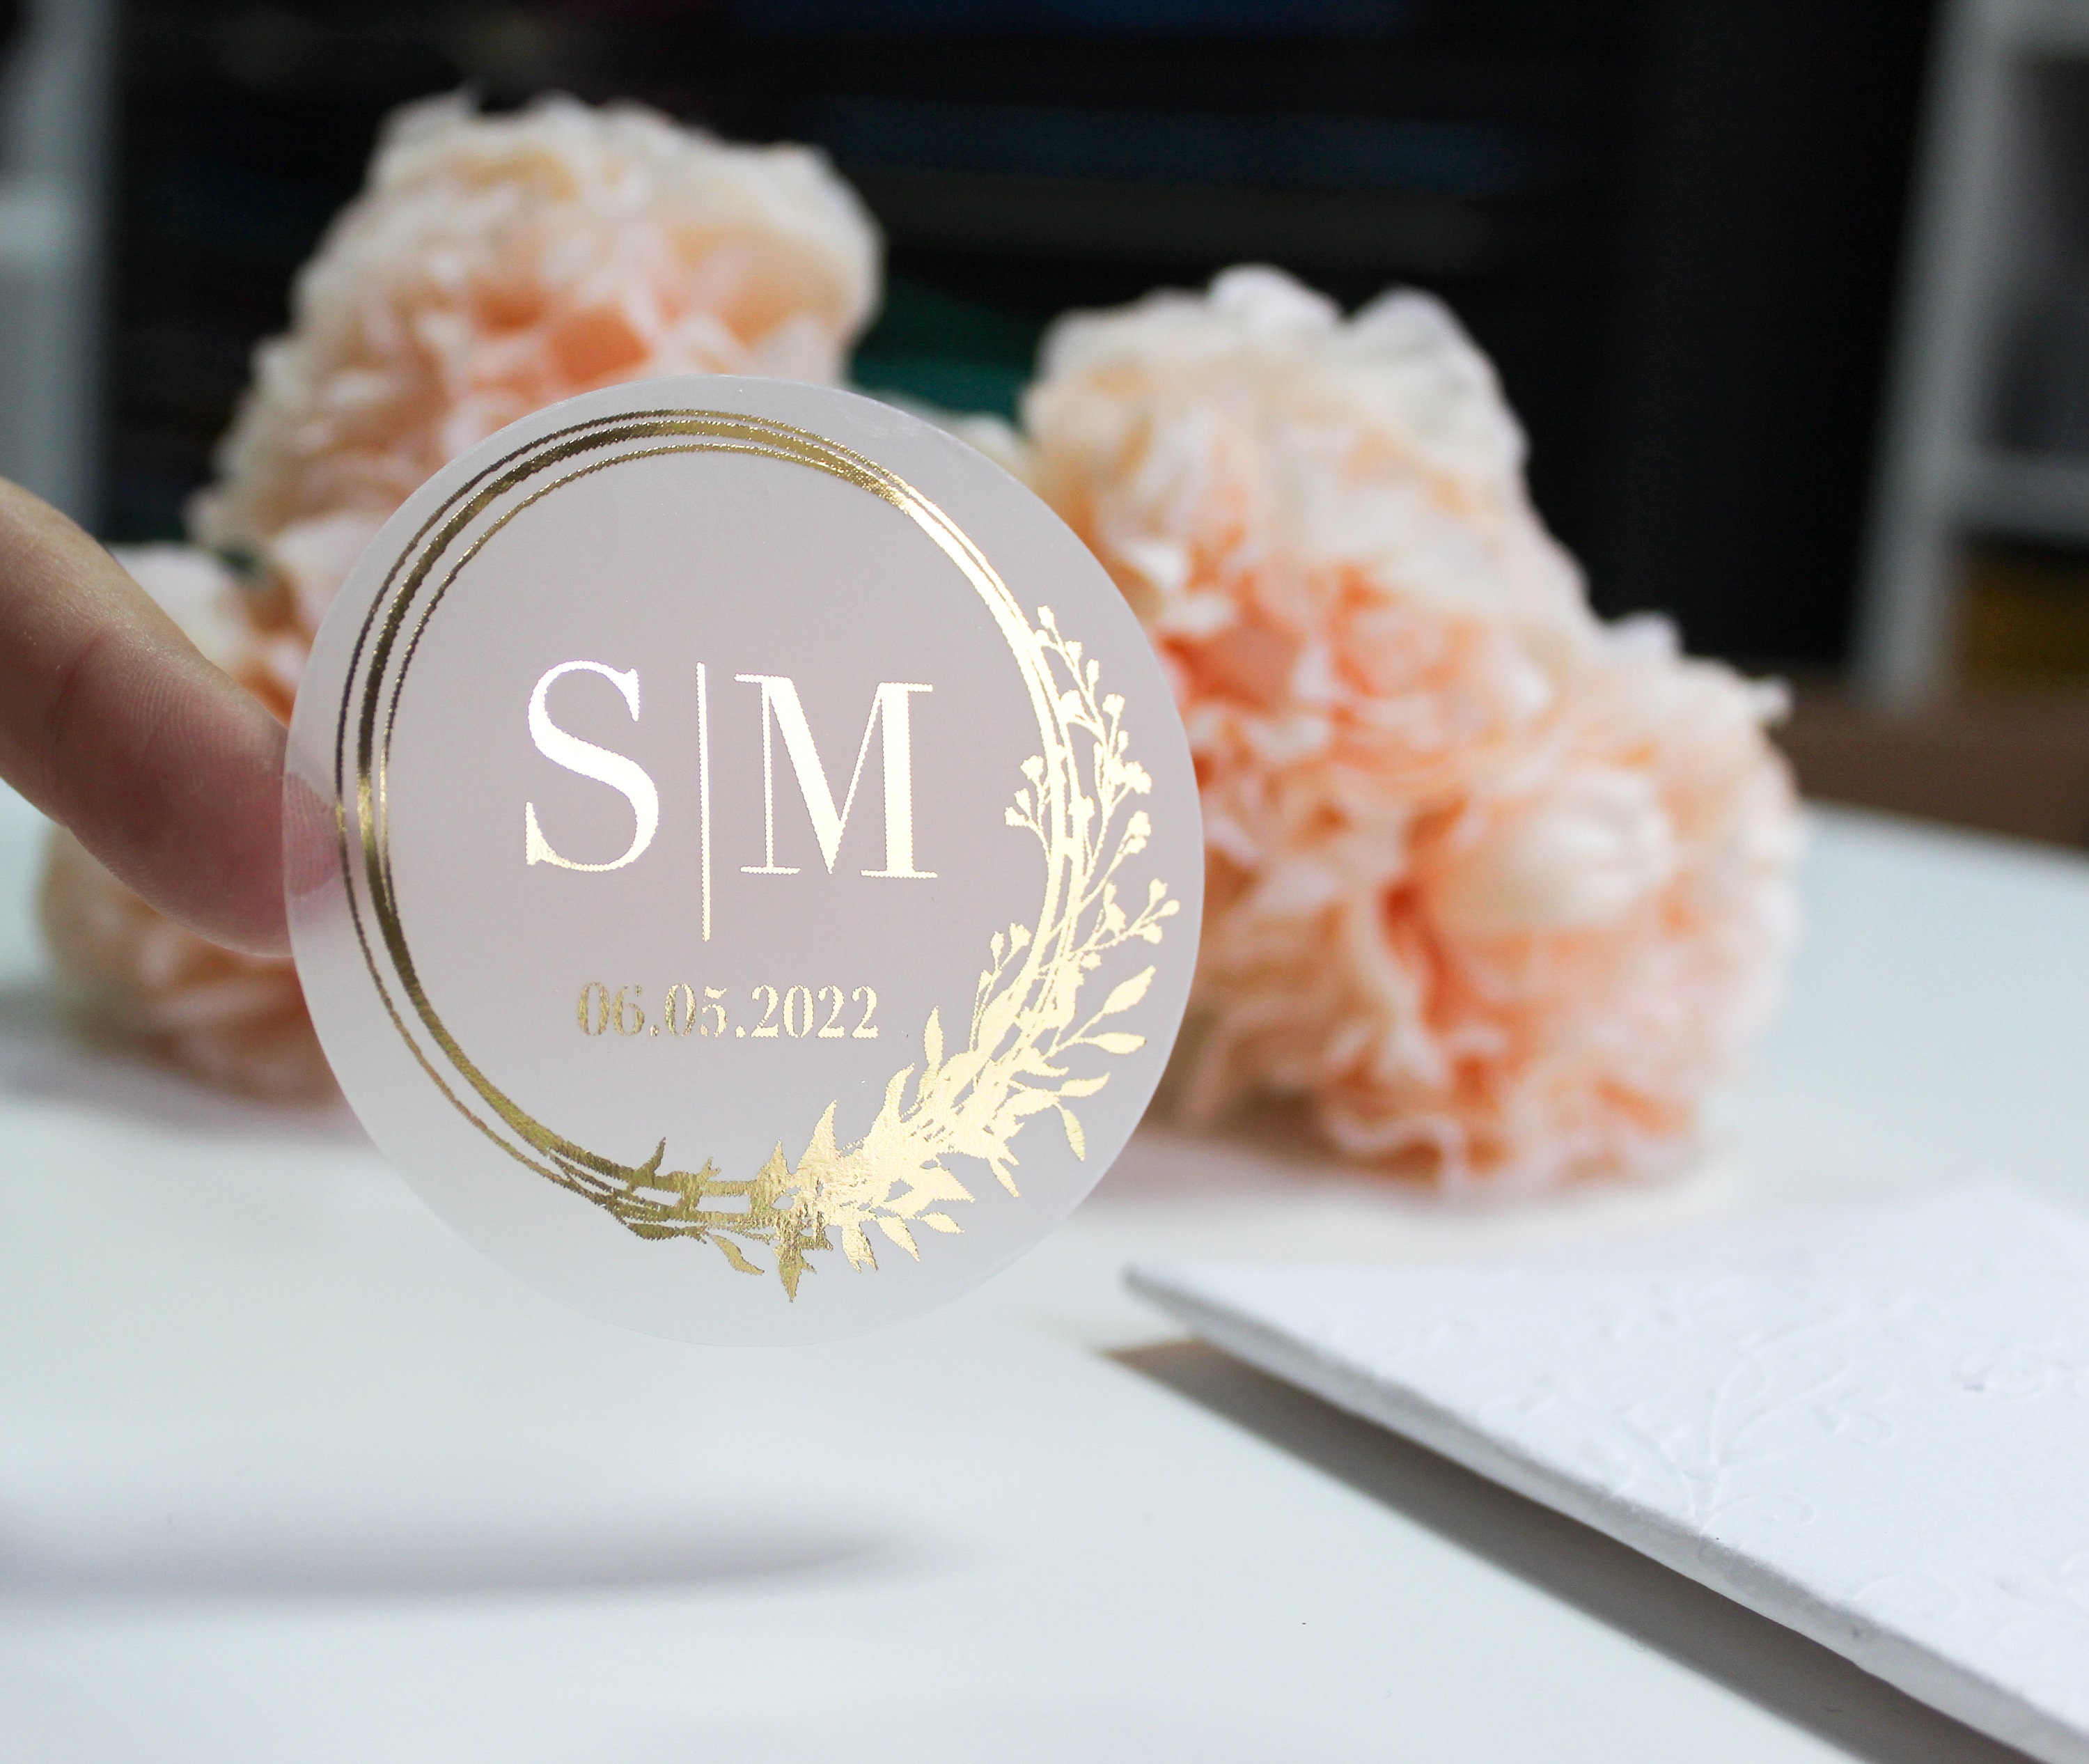 24pcs Personalized Wedding Stickers, Thank You for Coming Stickers, Thank  You for Celebrating with Us Sticker, Wedding Stickers for Envelopes,  Wedding